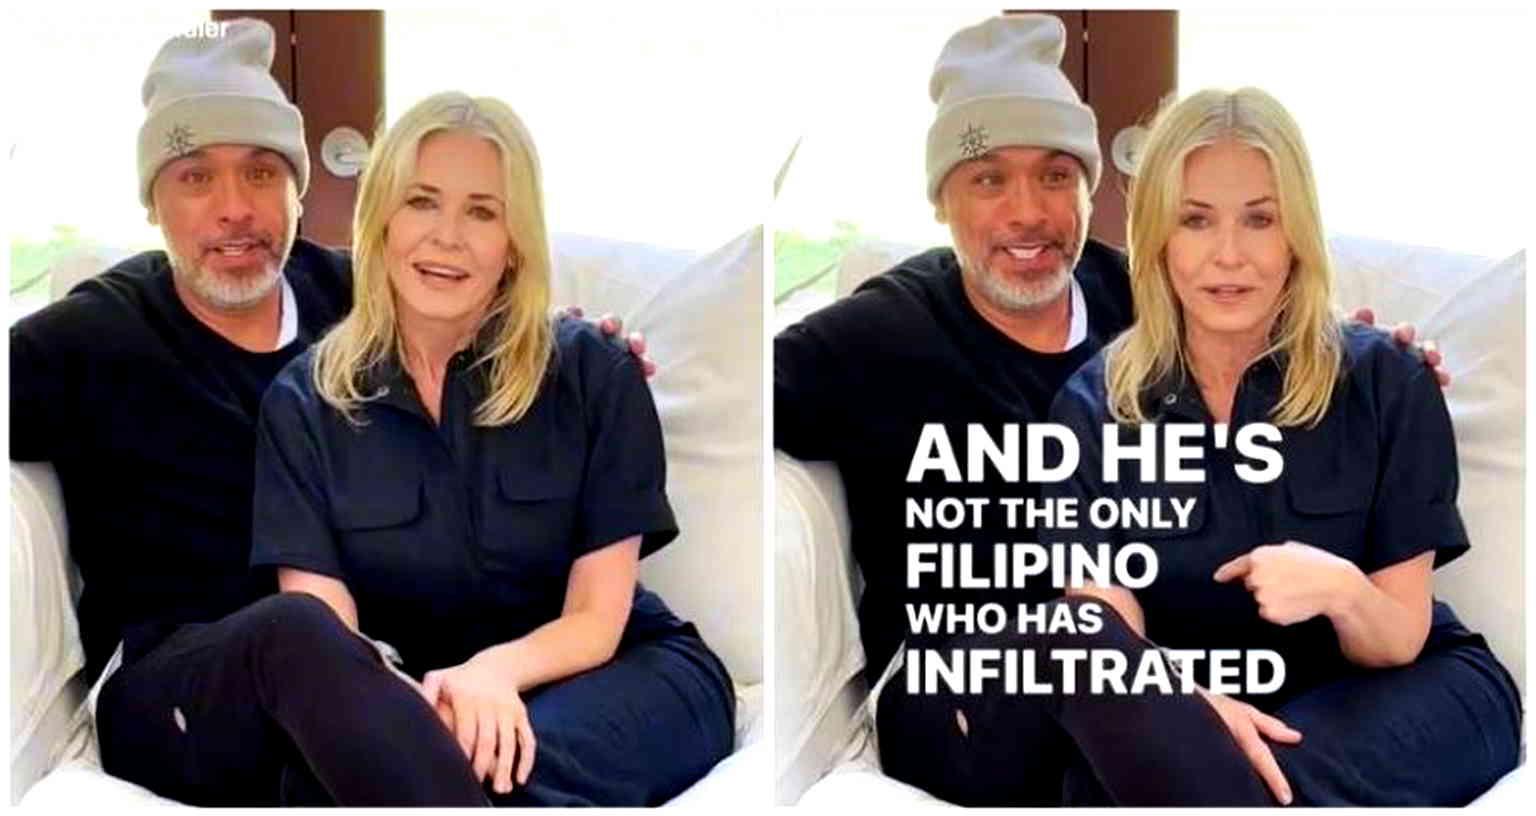 ‘We want more Filipinos!’: Chelsea Handler jokes in Jo Koy video her family has been ‘infiltrated’ by Filipinos